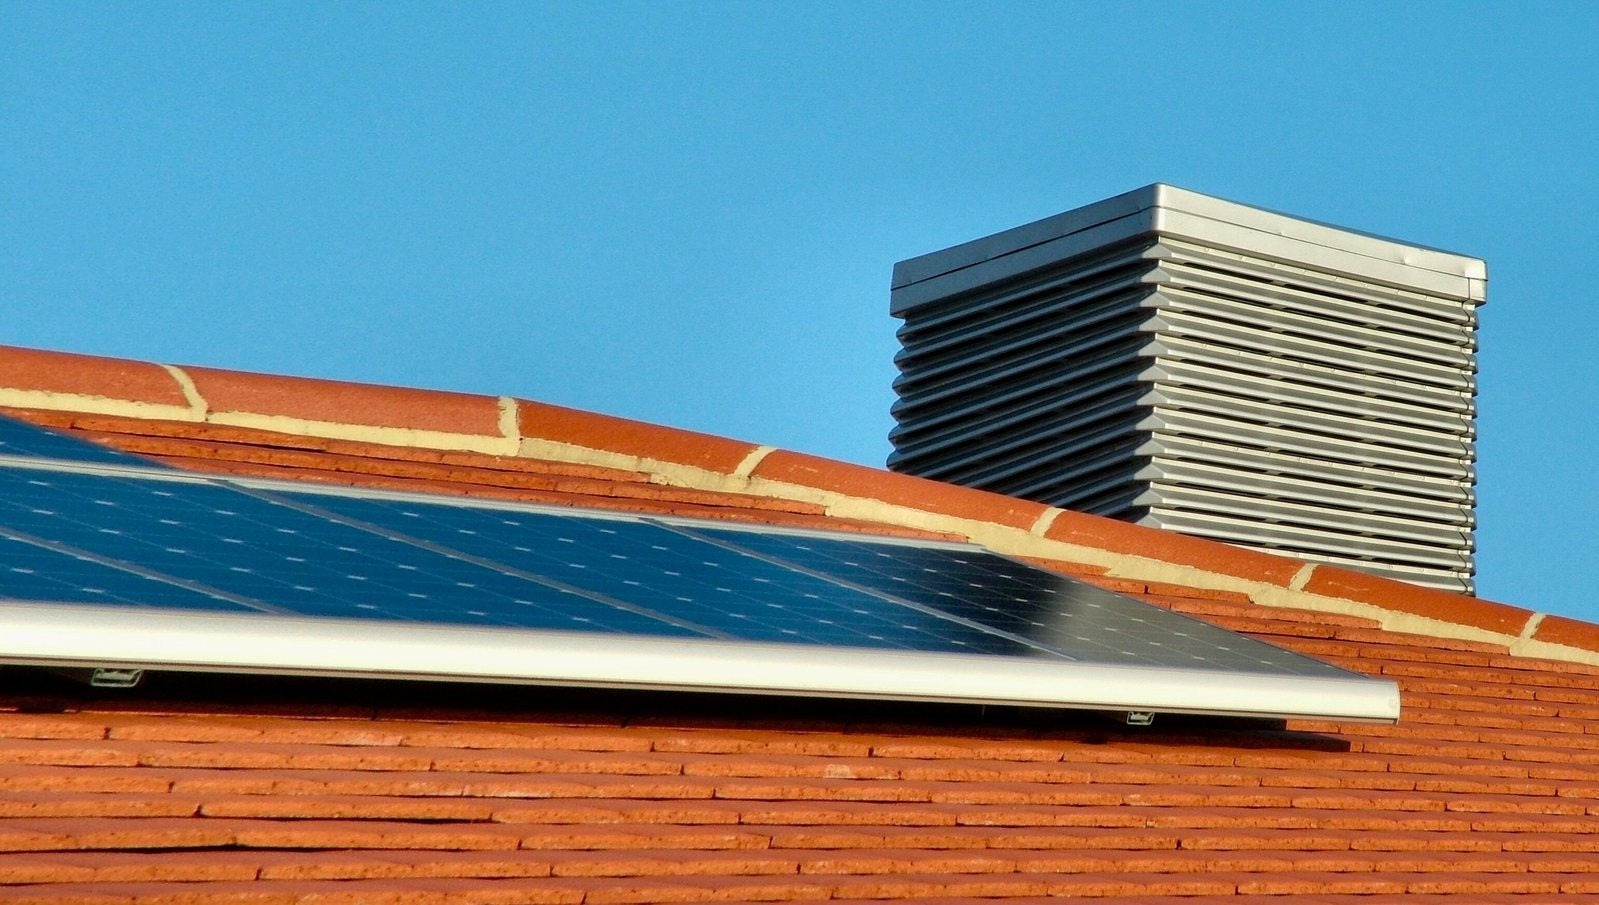 Solar panels for apartments & renters: your options